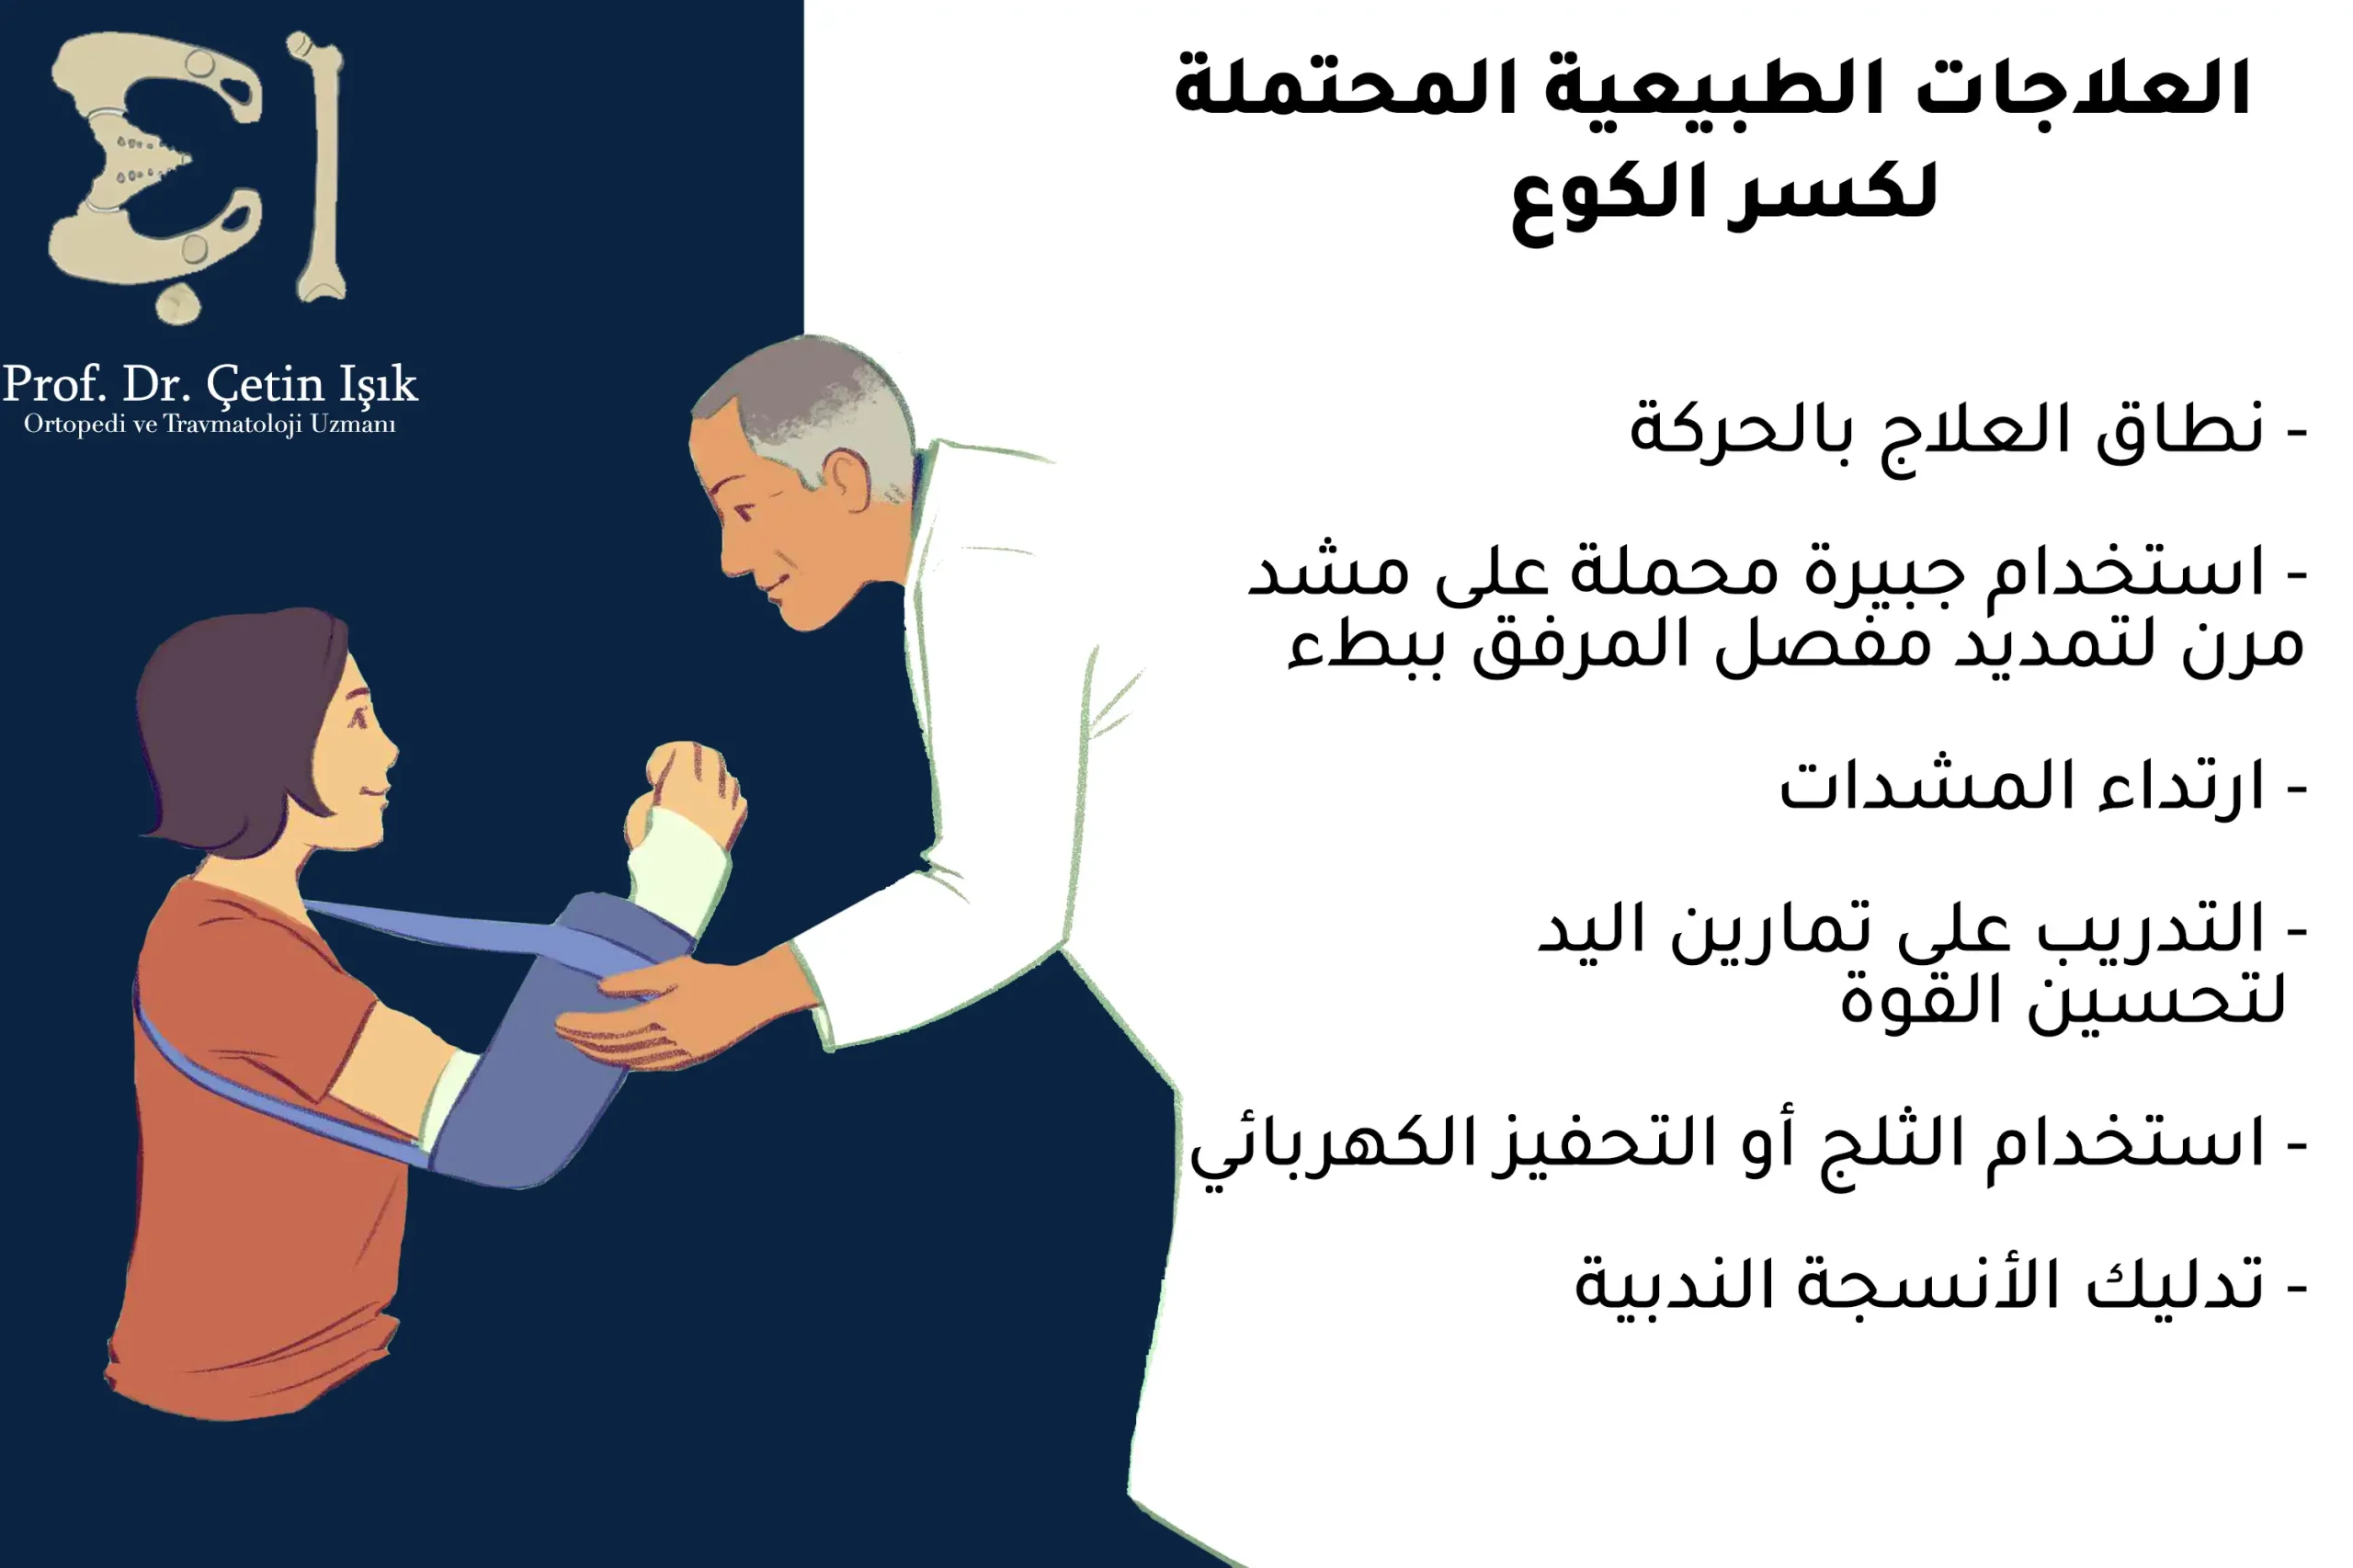 We note from the picture the most important methods of treating elbow joint pain without surgery, which are: wearing a splint or braces, training in hand exercises, using ice, electrical stimulation, increasing the range of motion with physical therapy, and massaging scar tissue